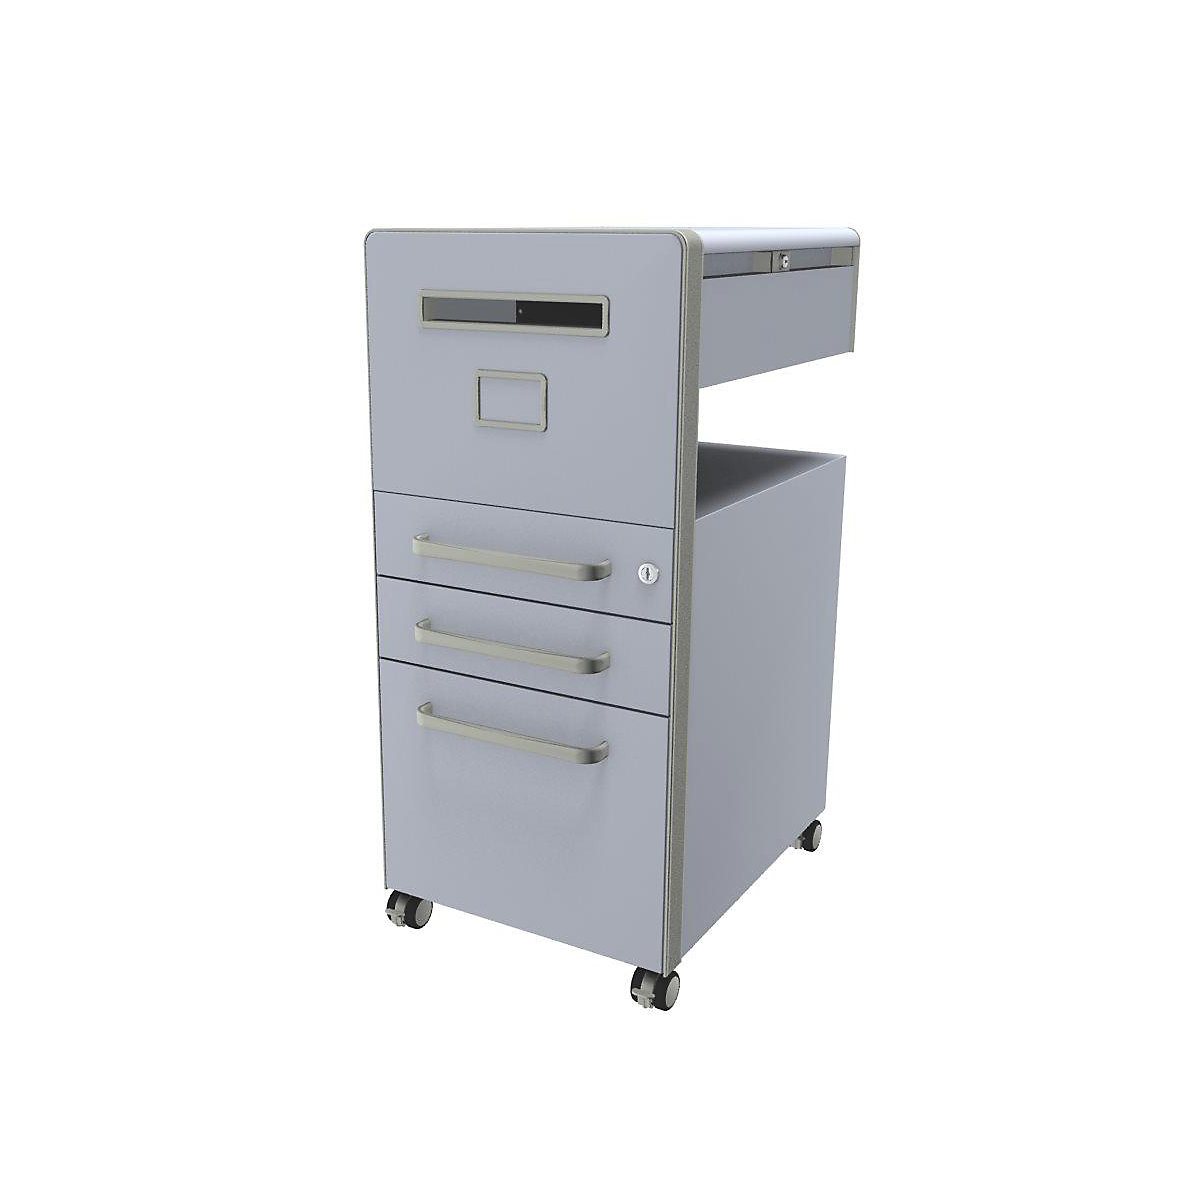 Bite™ pedestal furniture, with 1 whiteboard, opens on the left side – BISLEY, with 2 universal drawers, 1 suspension file drawer, alaska-27